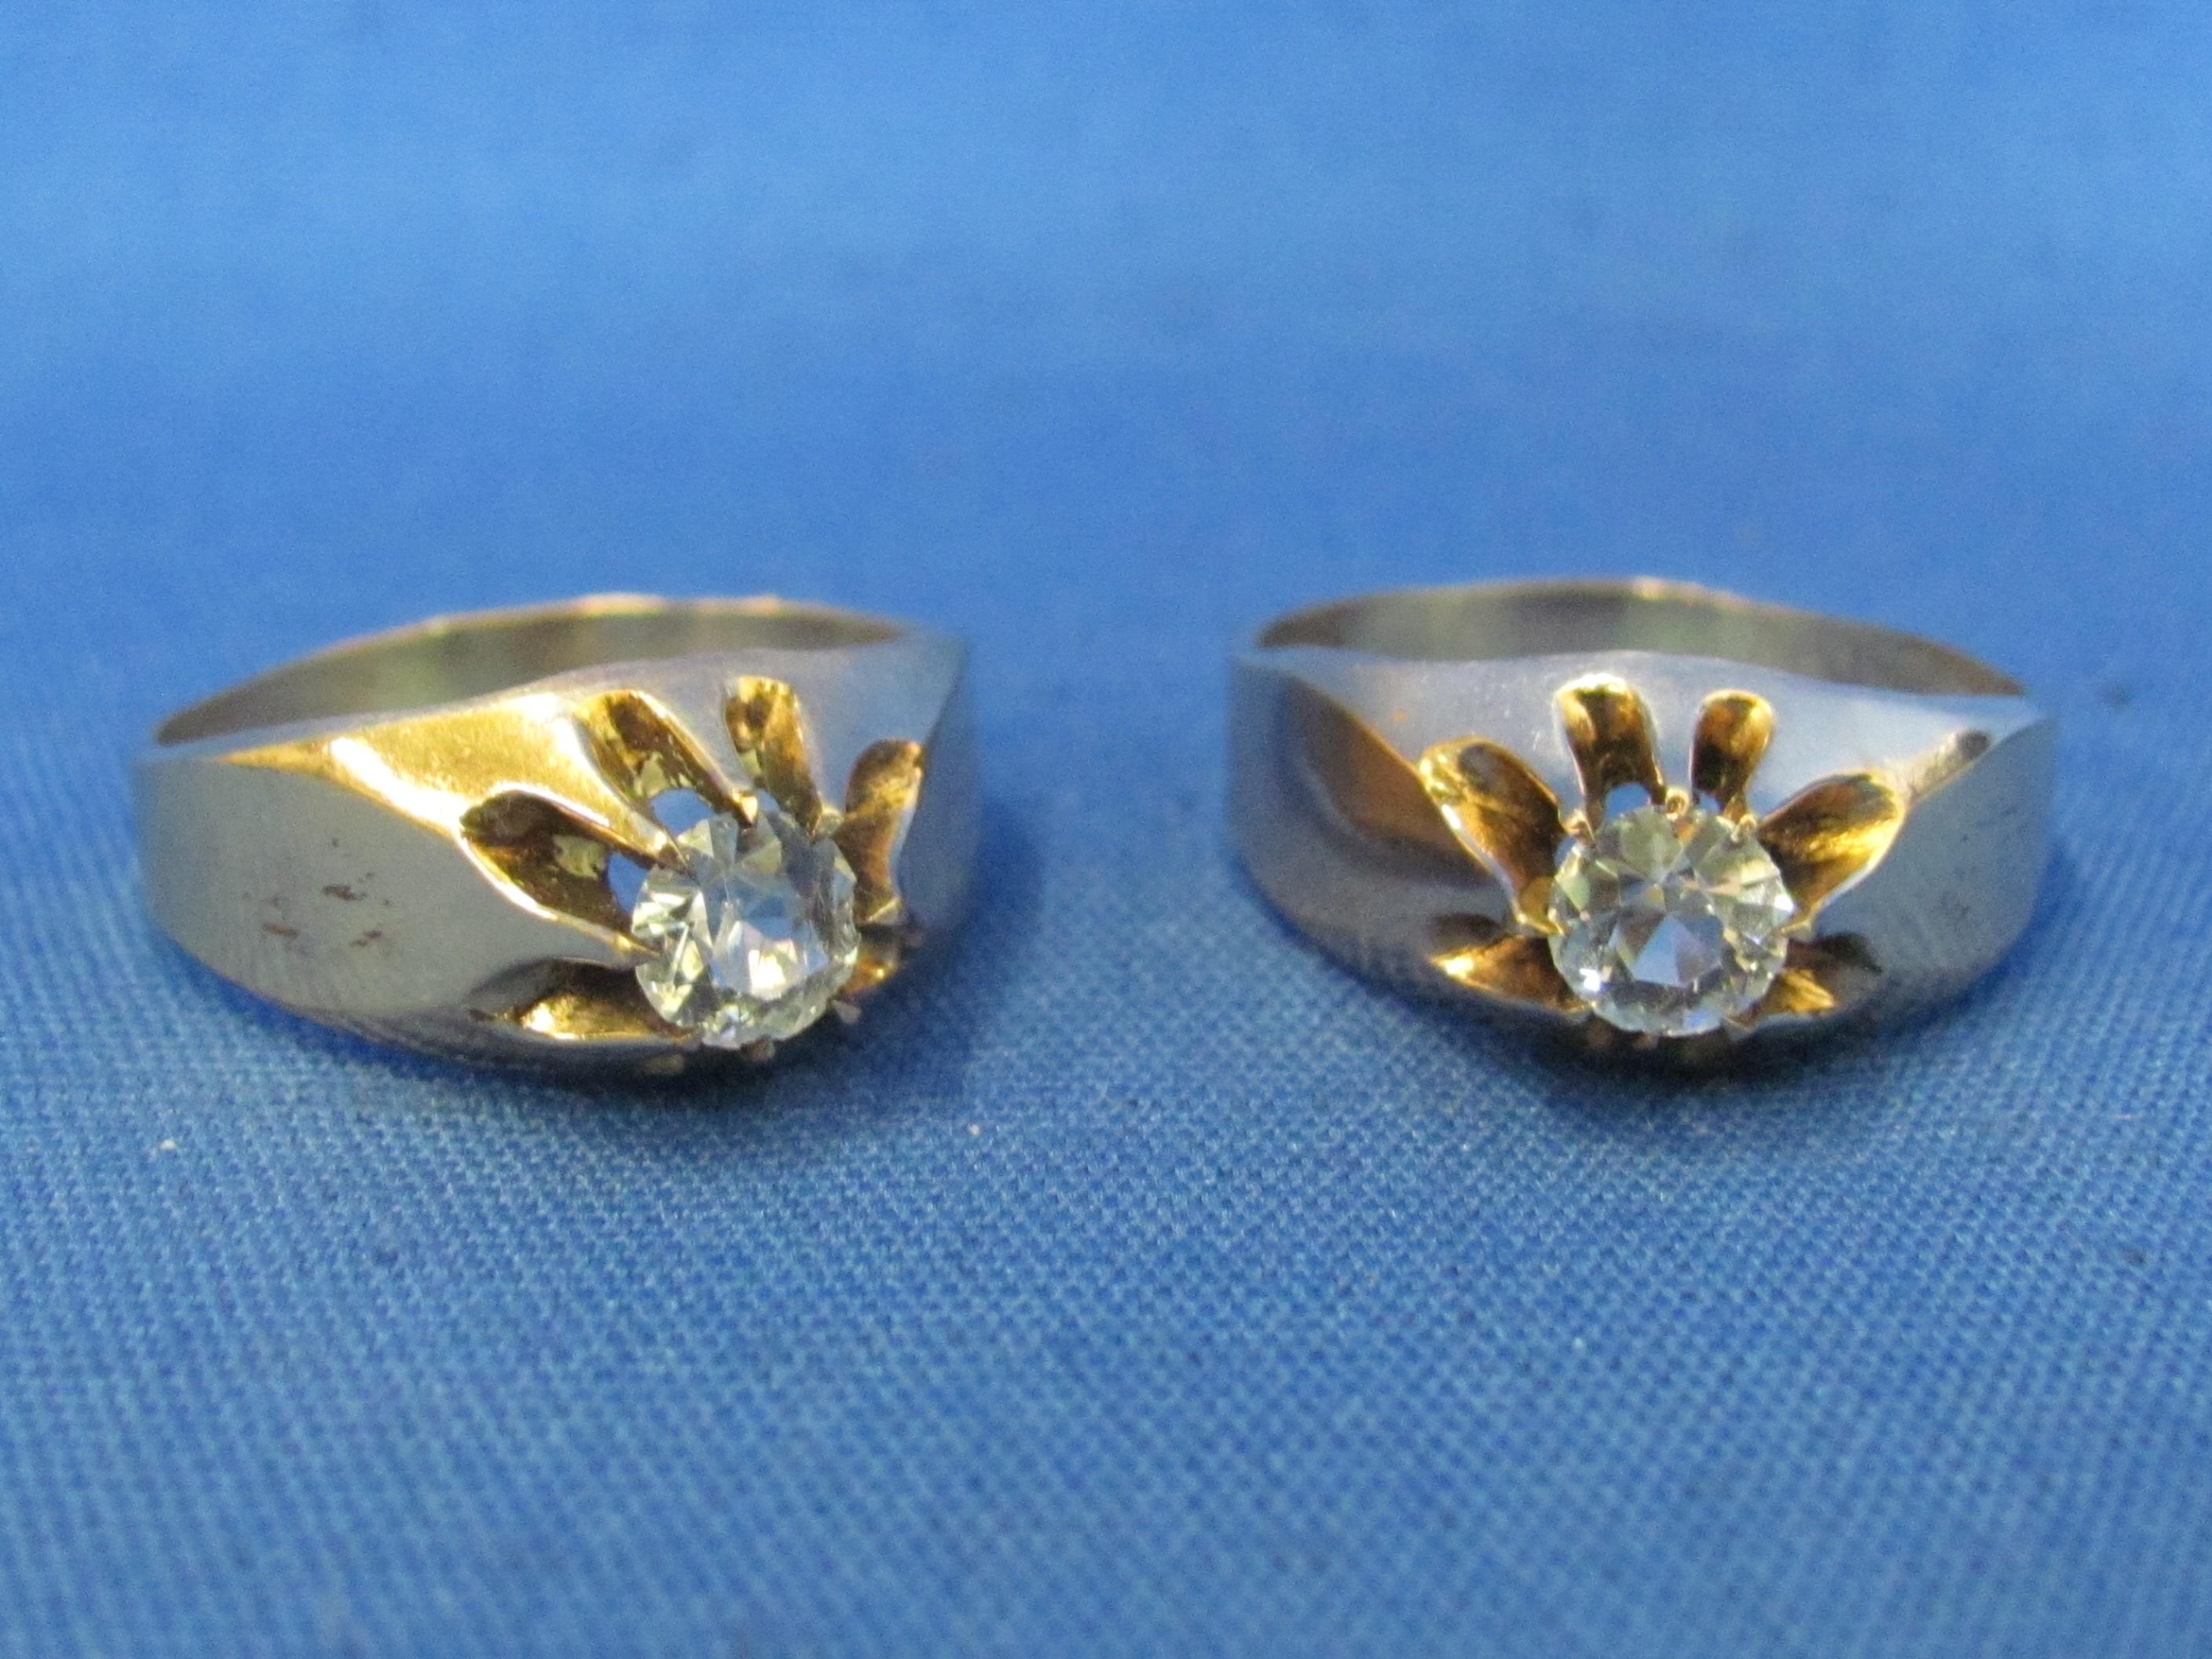 Pair of 14 Kt Gold Filled Rings with Solitaire Stone – Size 11.25